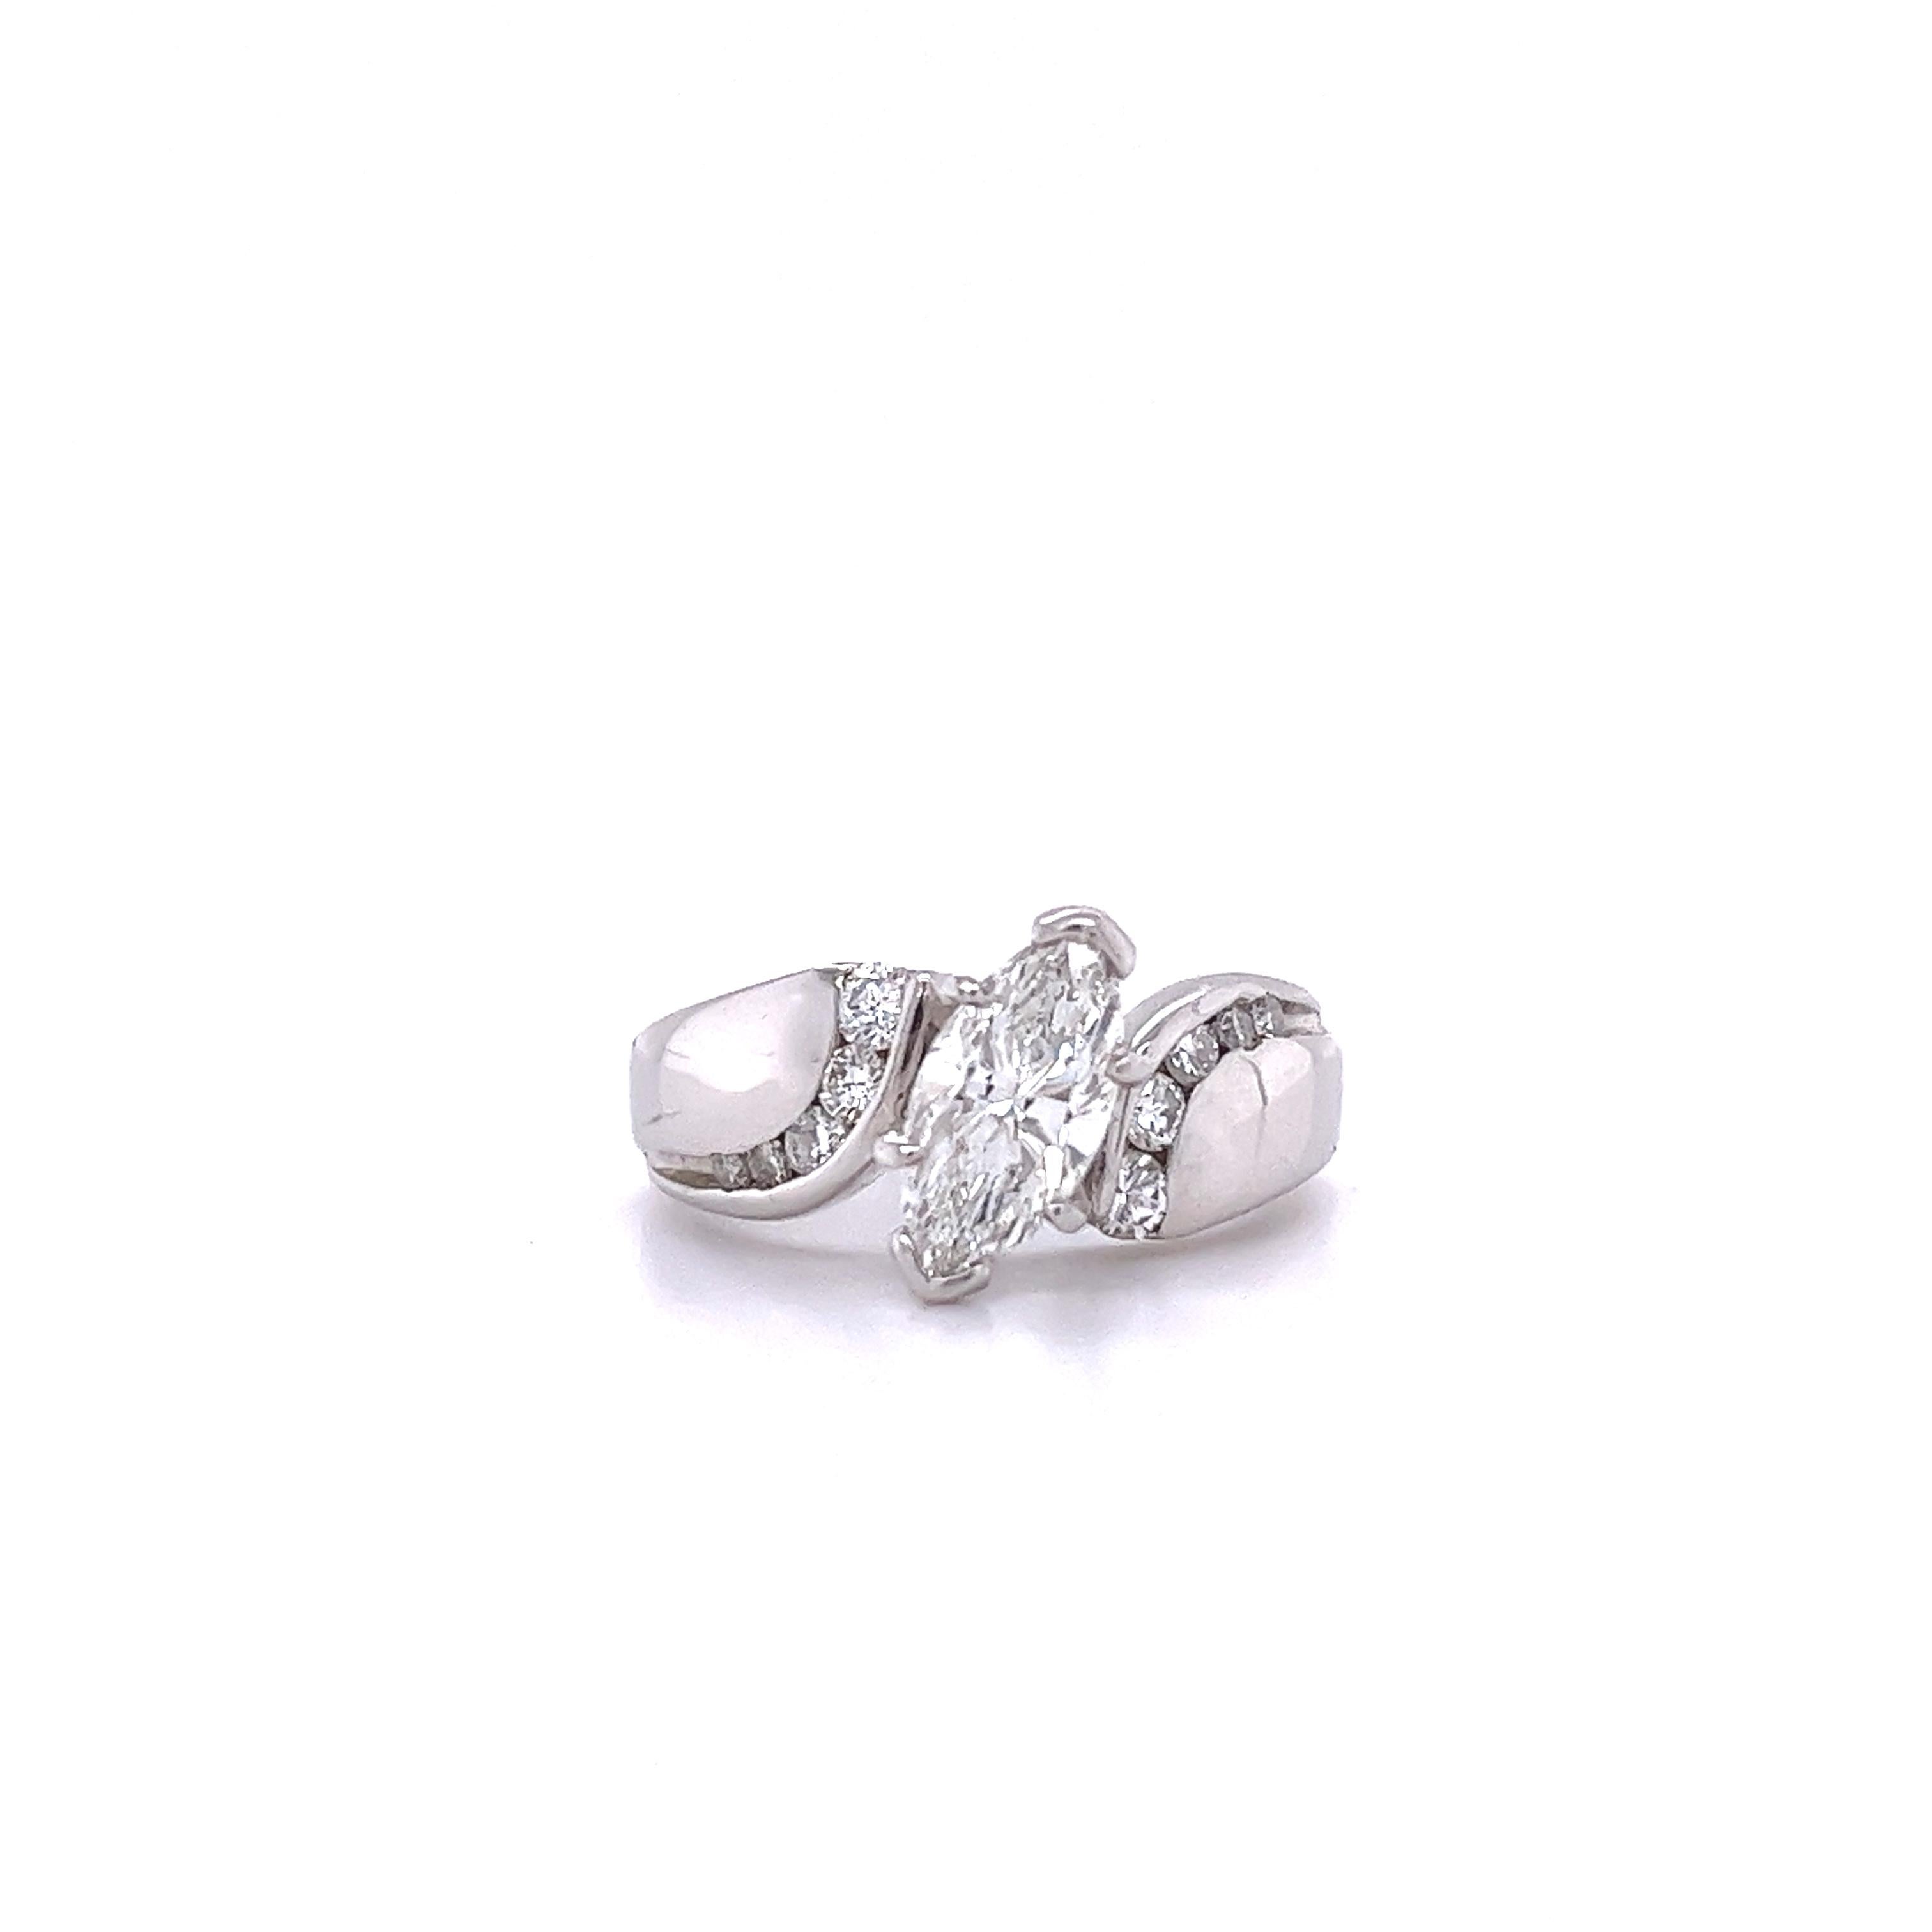 Platinum set natural diamond engagement ring with curvaceous bypass style ring shank. Center stone is 1.20 carats, eye clean, and excellent cut. Set in a secure 4-prong and half bezel setting. The half-bezel protects against the diamond ends from